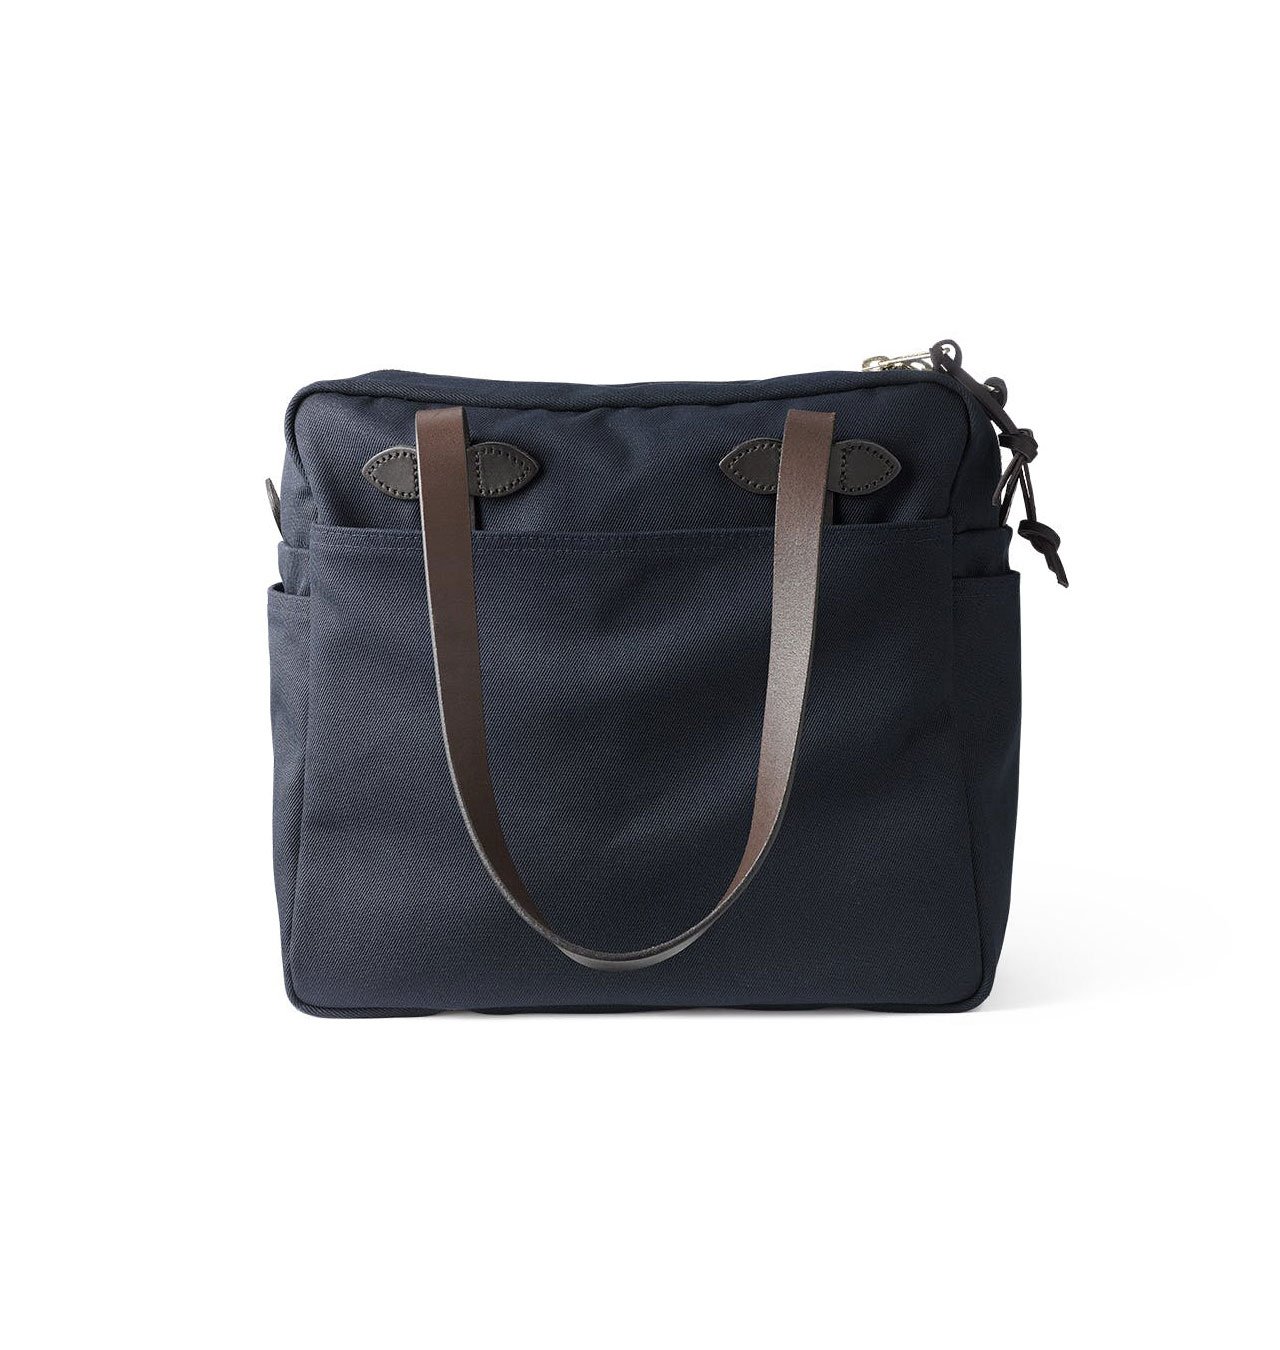 Filson - Tote Bag With Zipper - Navy